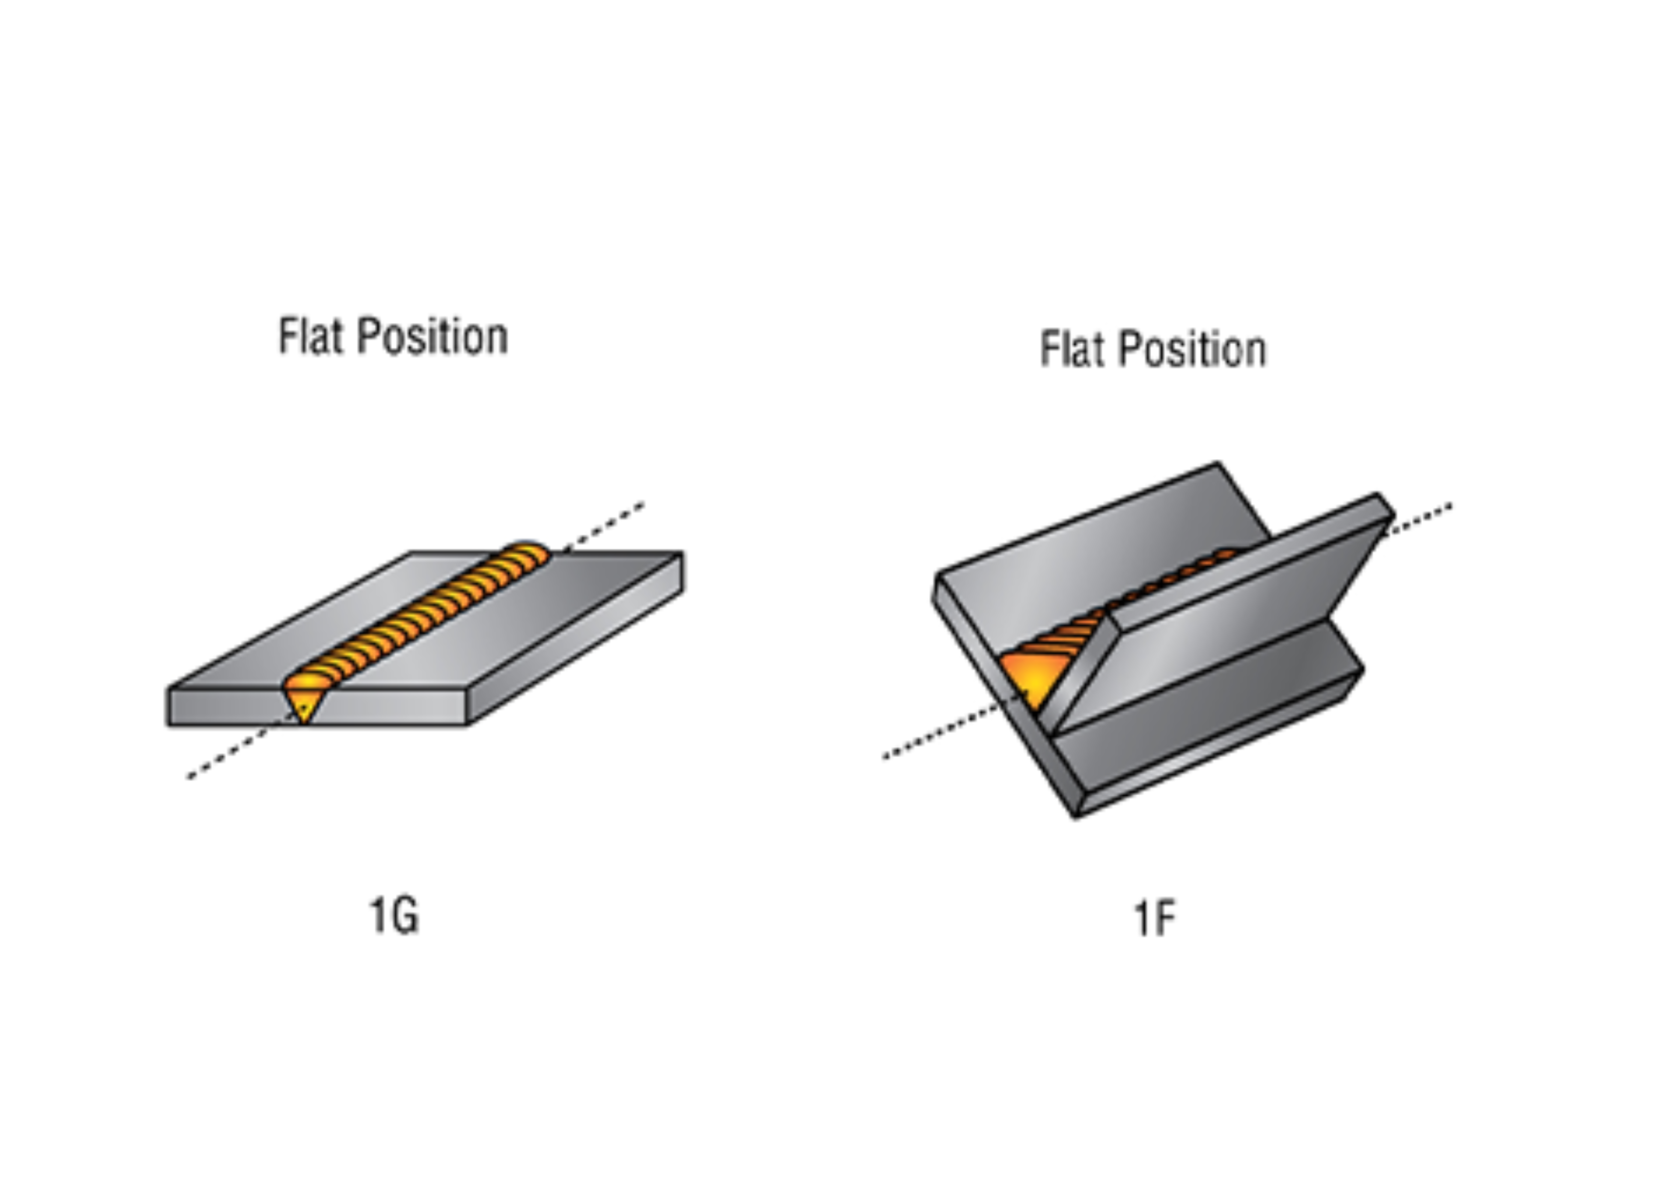 Welding positions: Weld Slope and Rotation - Weld World